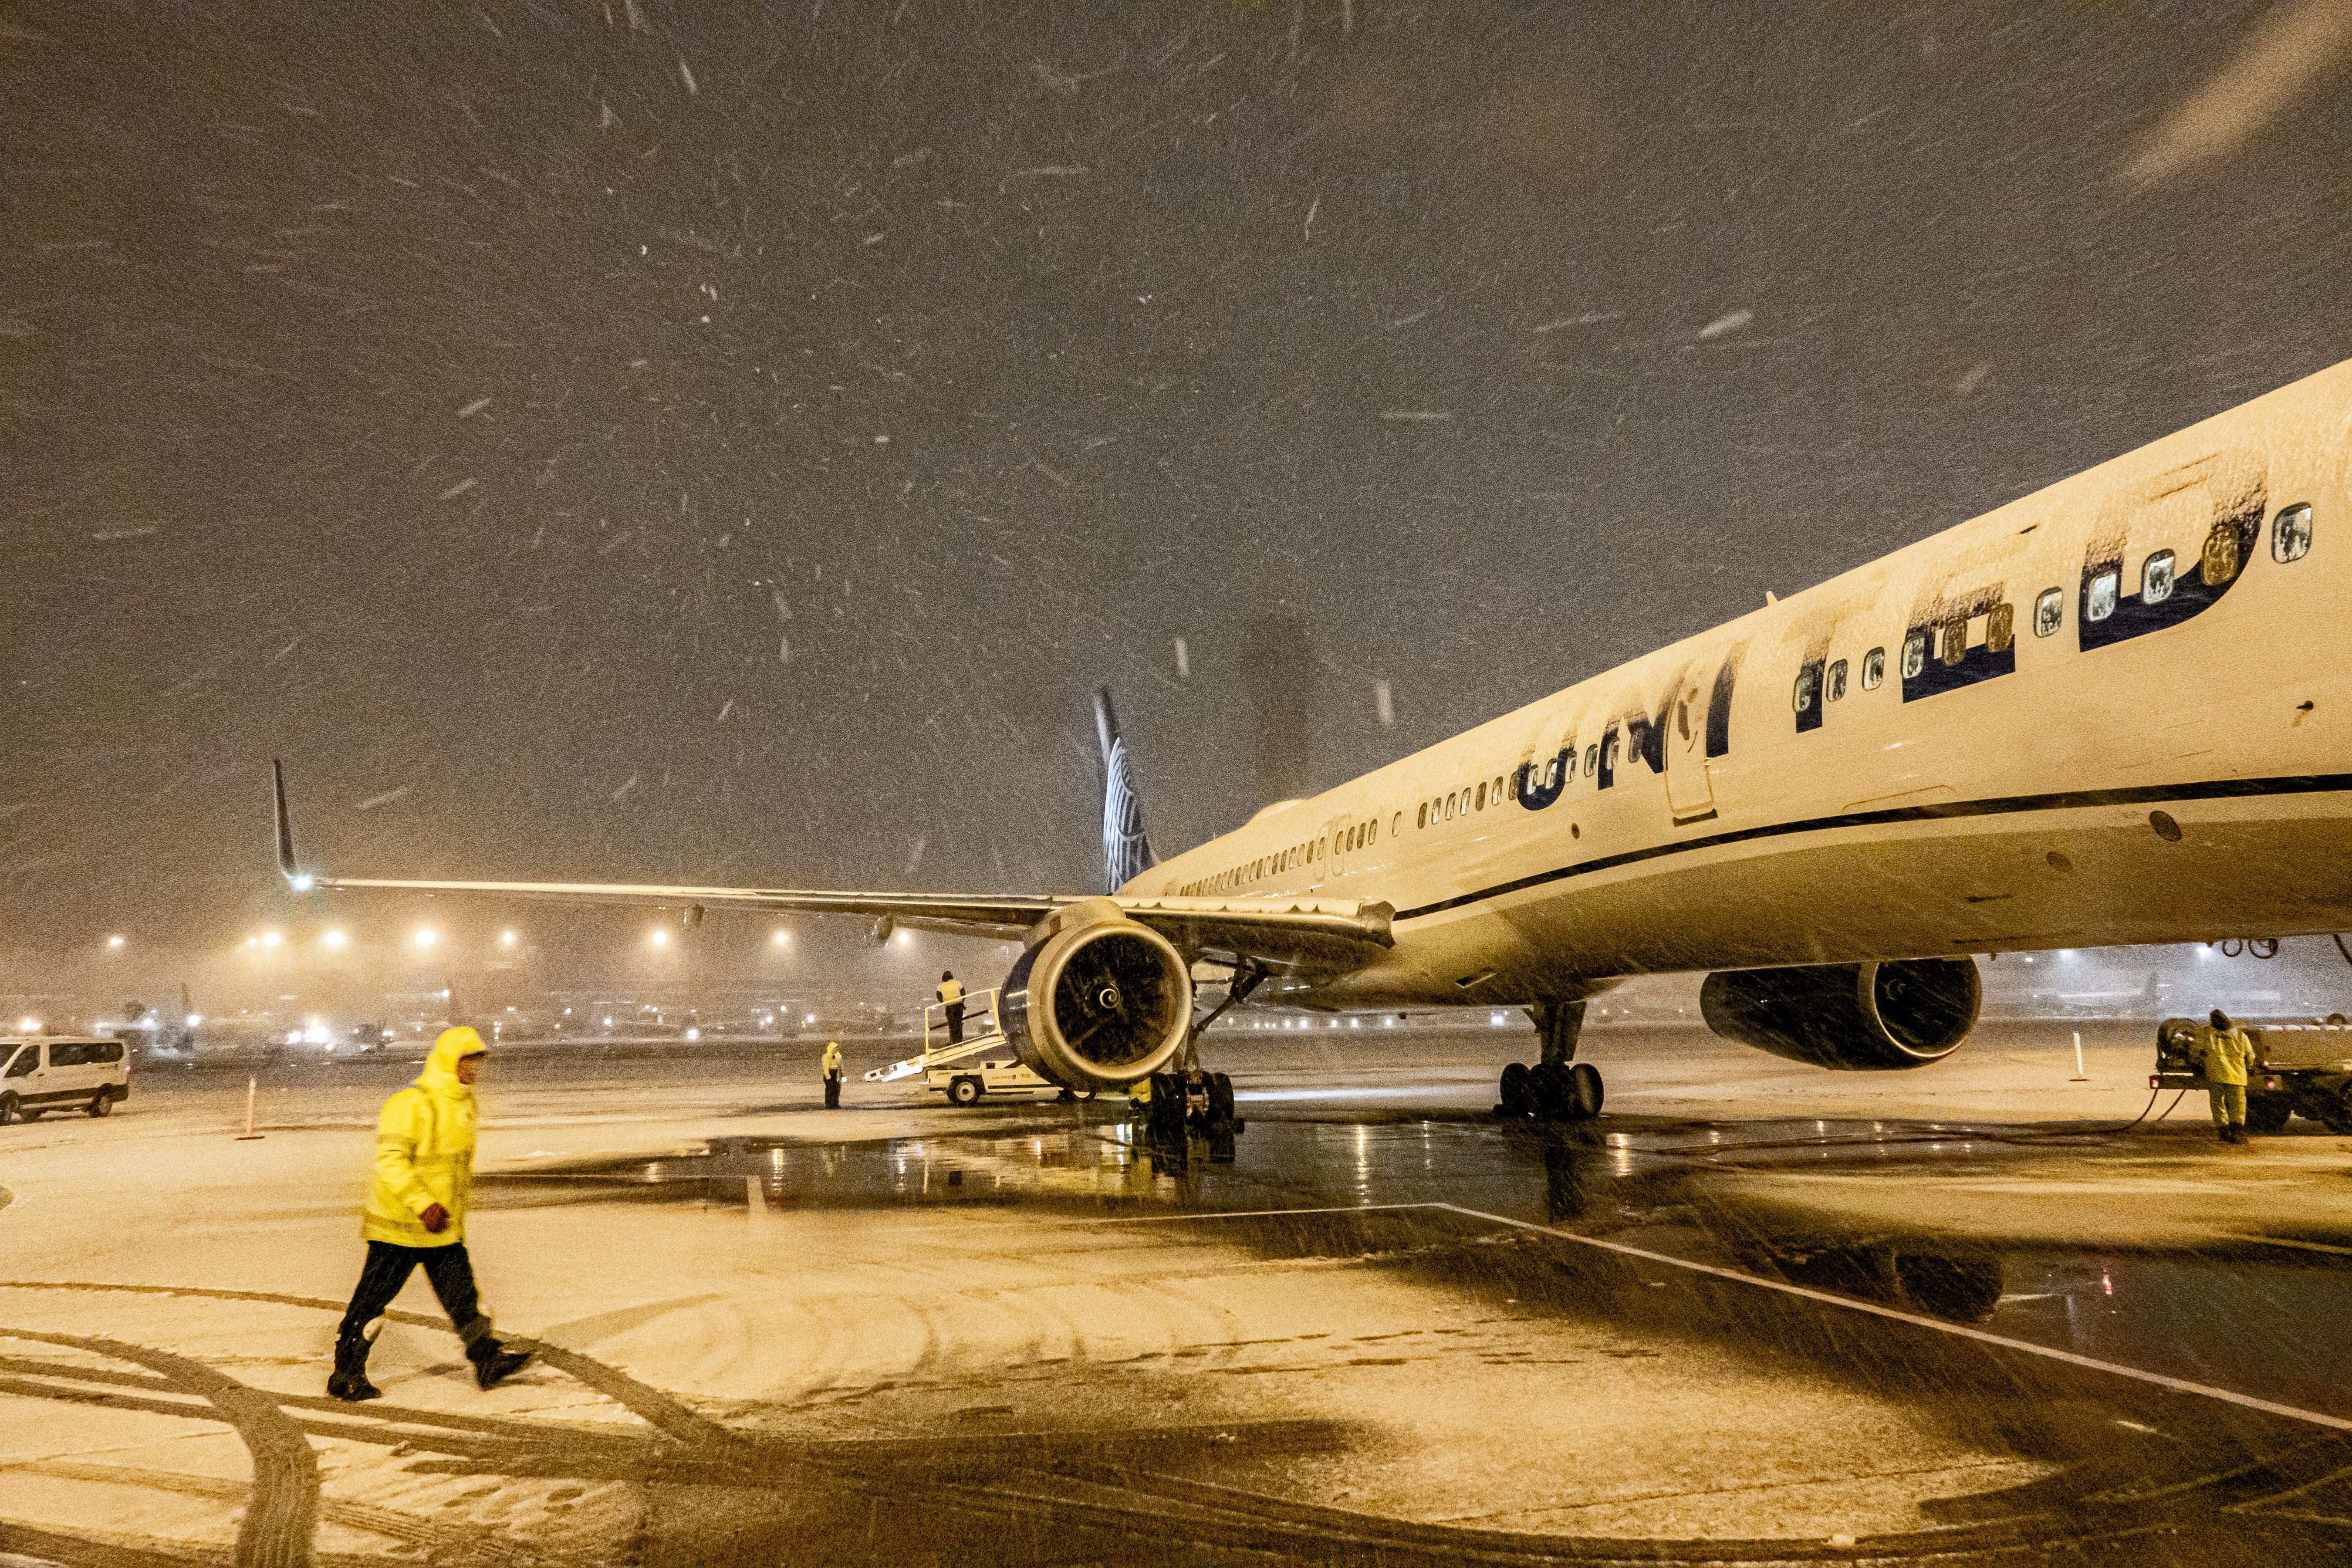 United Airlines Boeing 757 in snow at airport